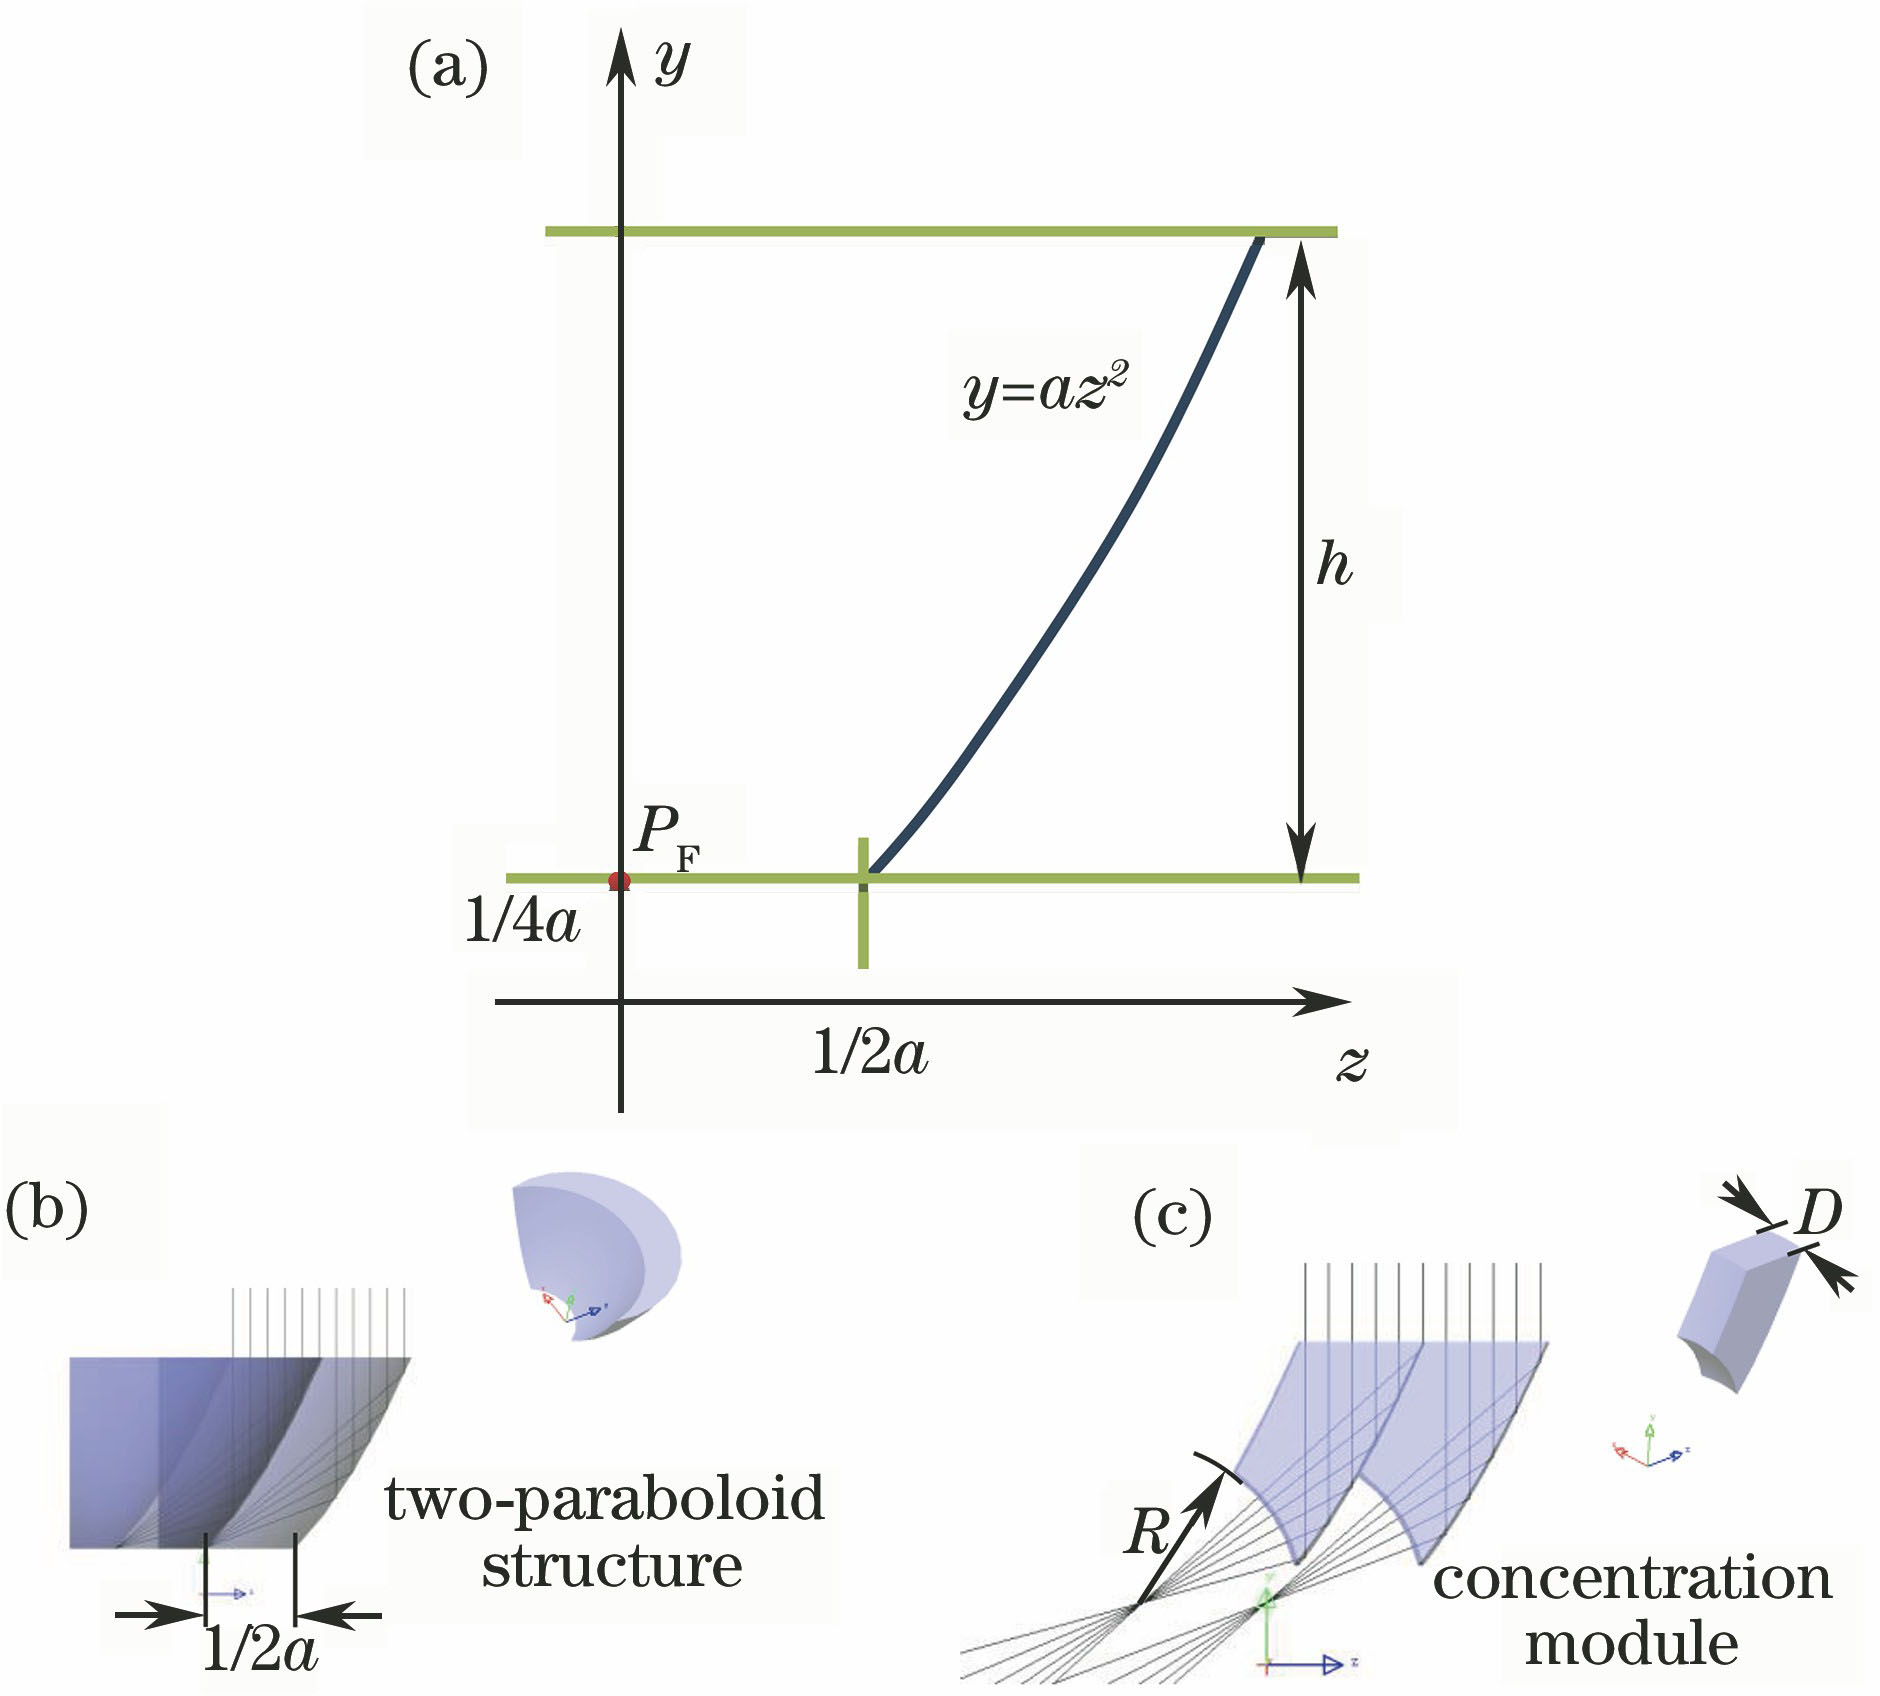 Schematic of modification procedure of the concentration module. (a) Parabola curve in the reflective surface; (b) two-paraboloid structure; (c) concentration module trimmed off